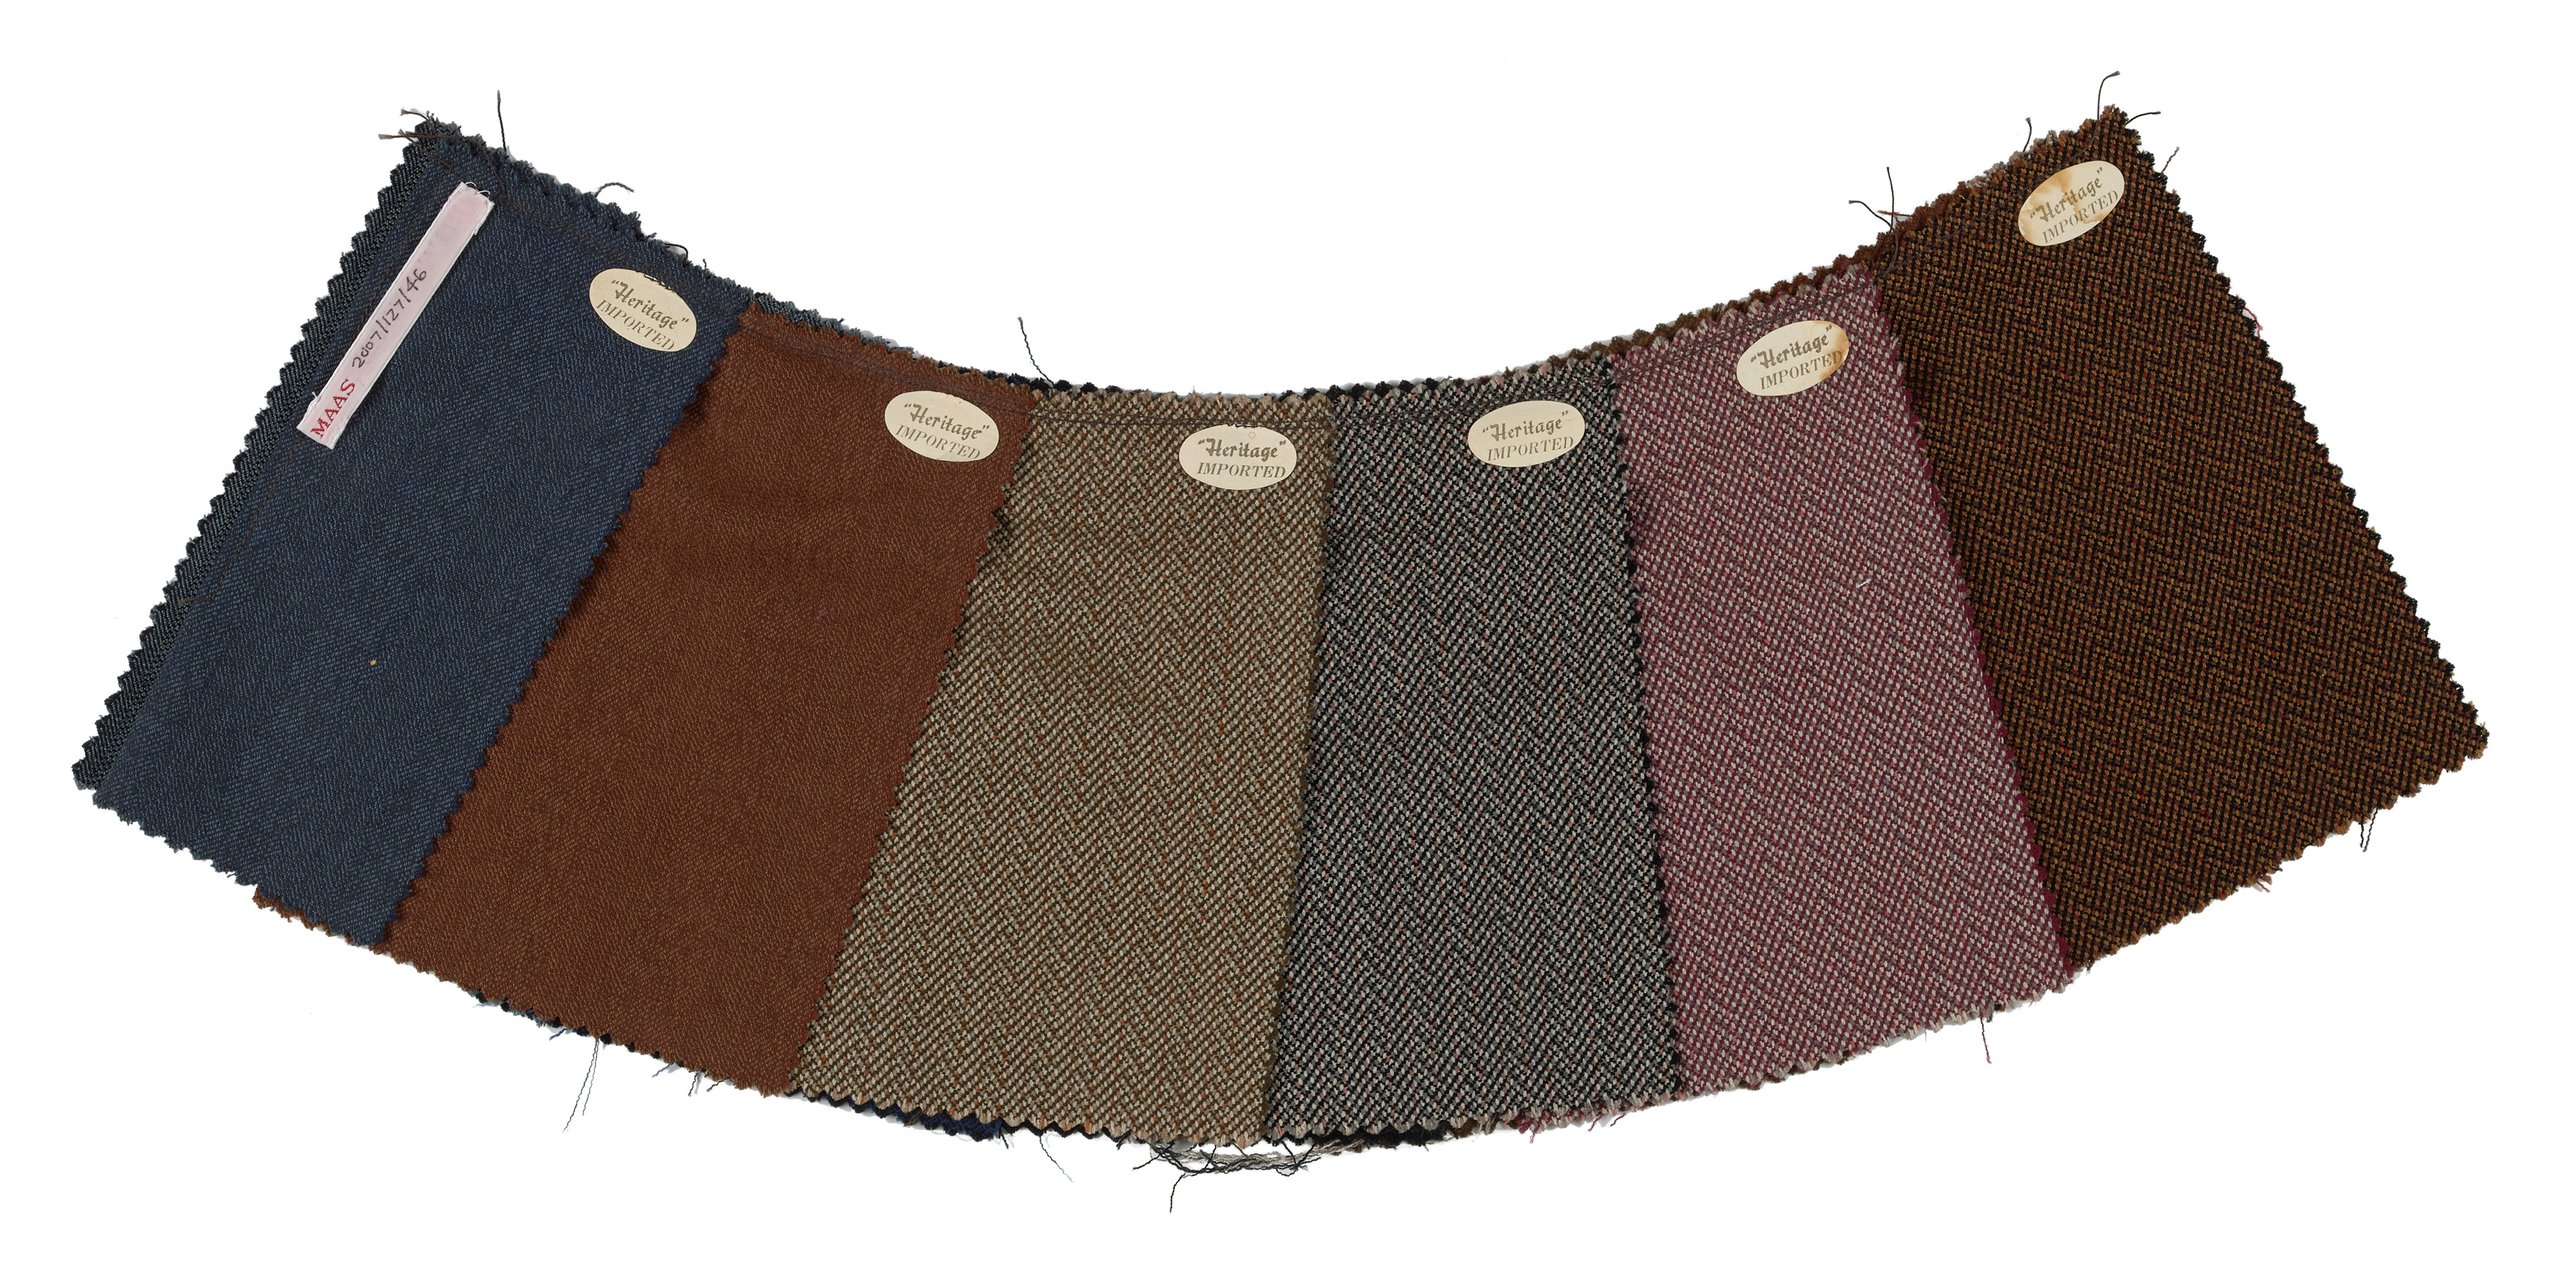 Textile swatches used by Ron Gillman